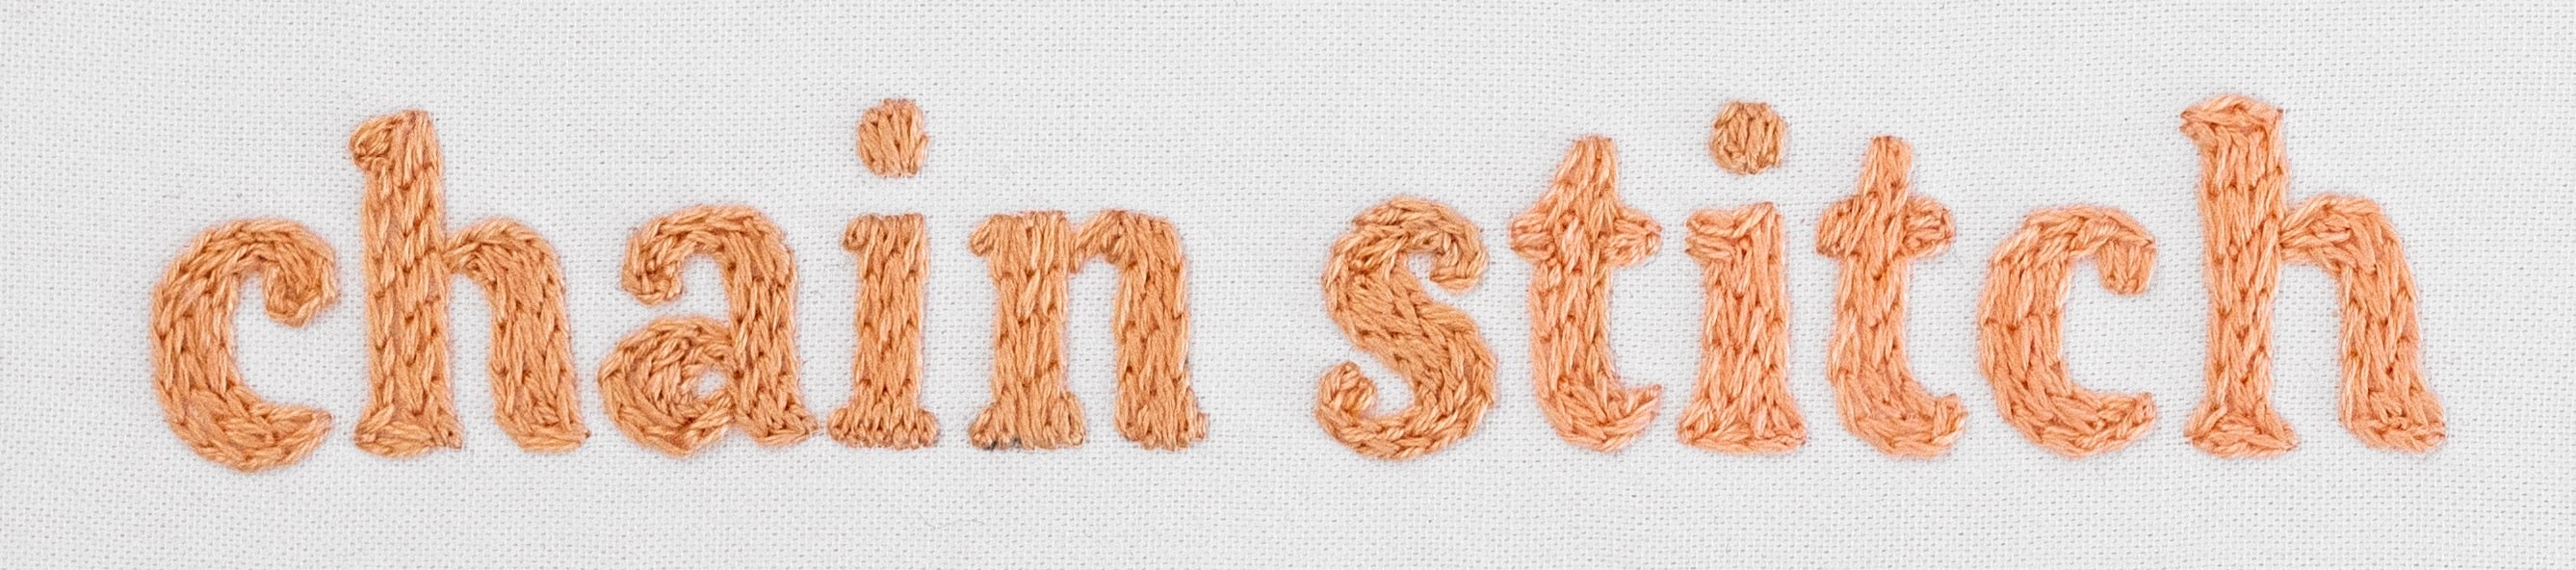 This image is of a word using chain stitch.